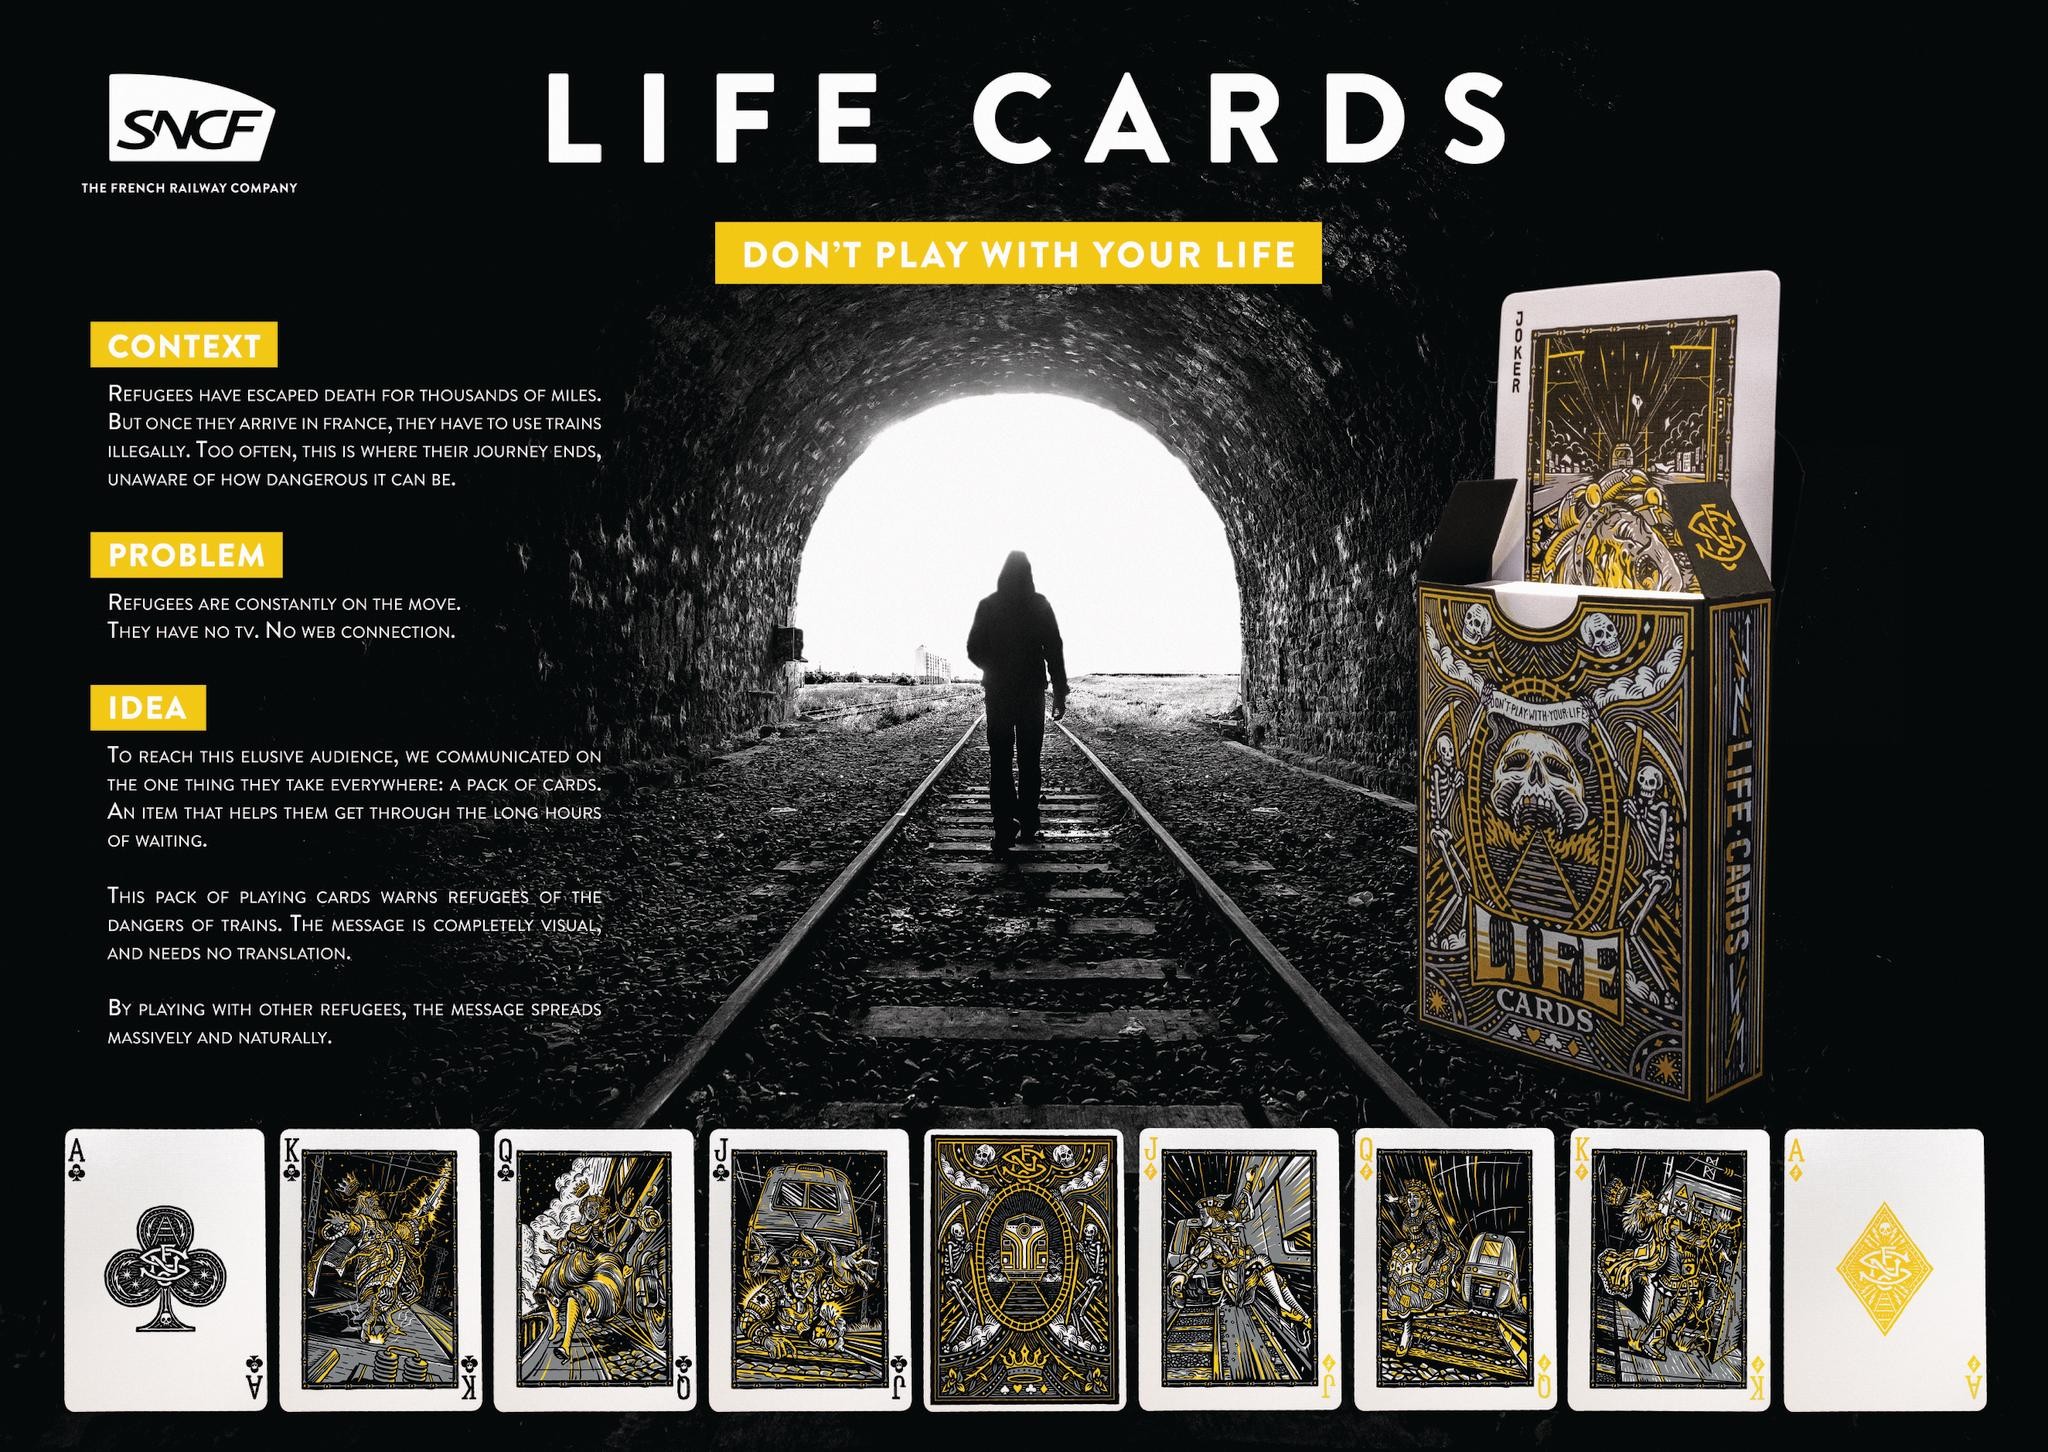 Life cards